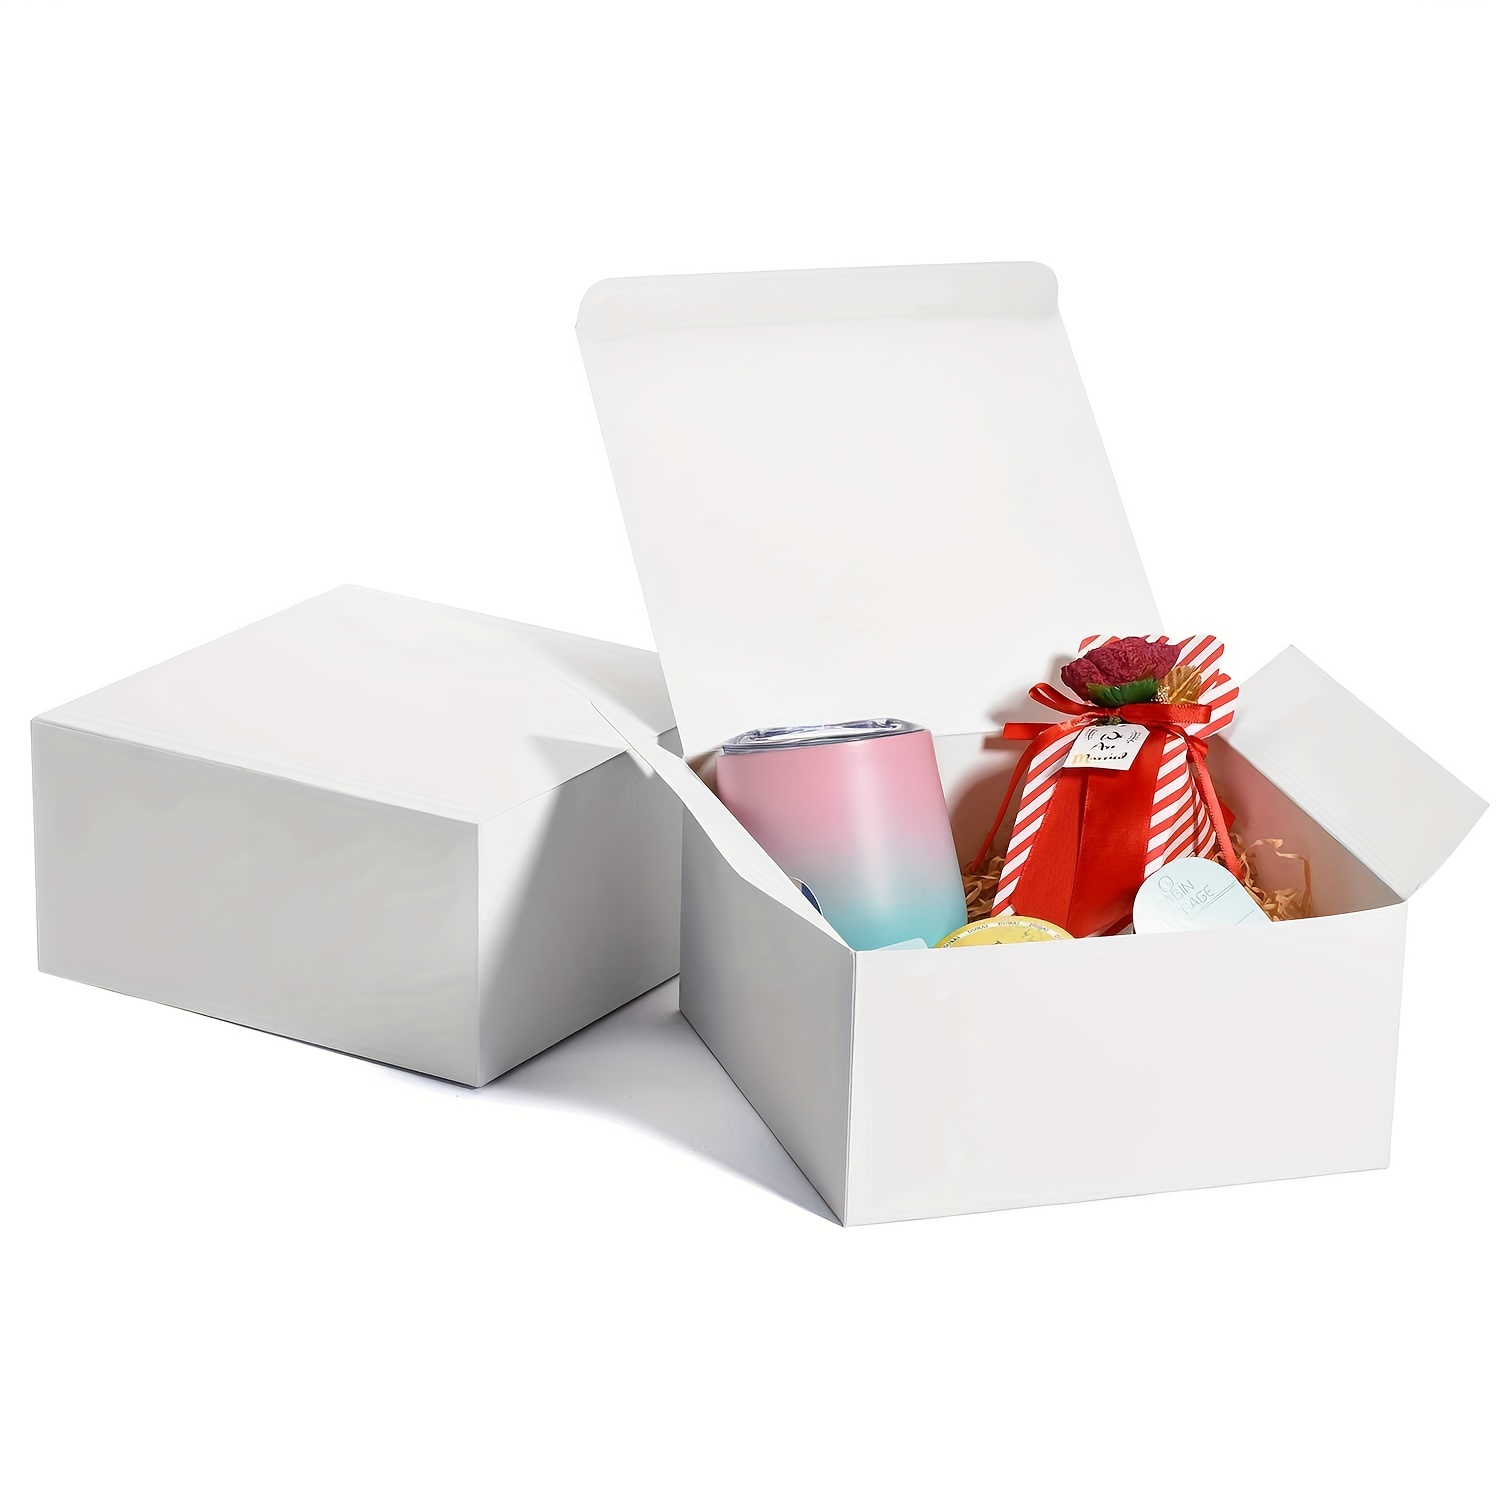 Paper Party Supplies, Gift Boxes Birthday, Paper Gift Bag